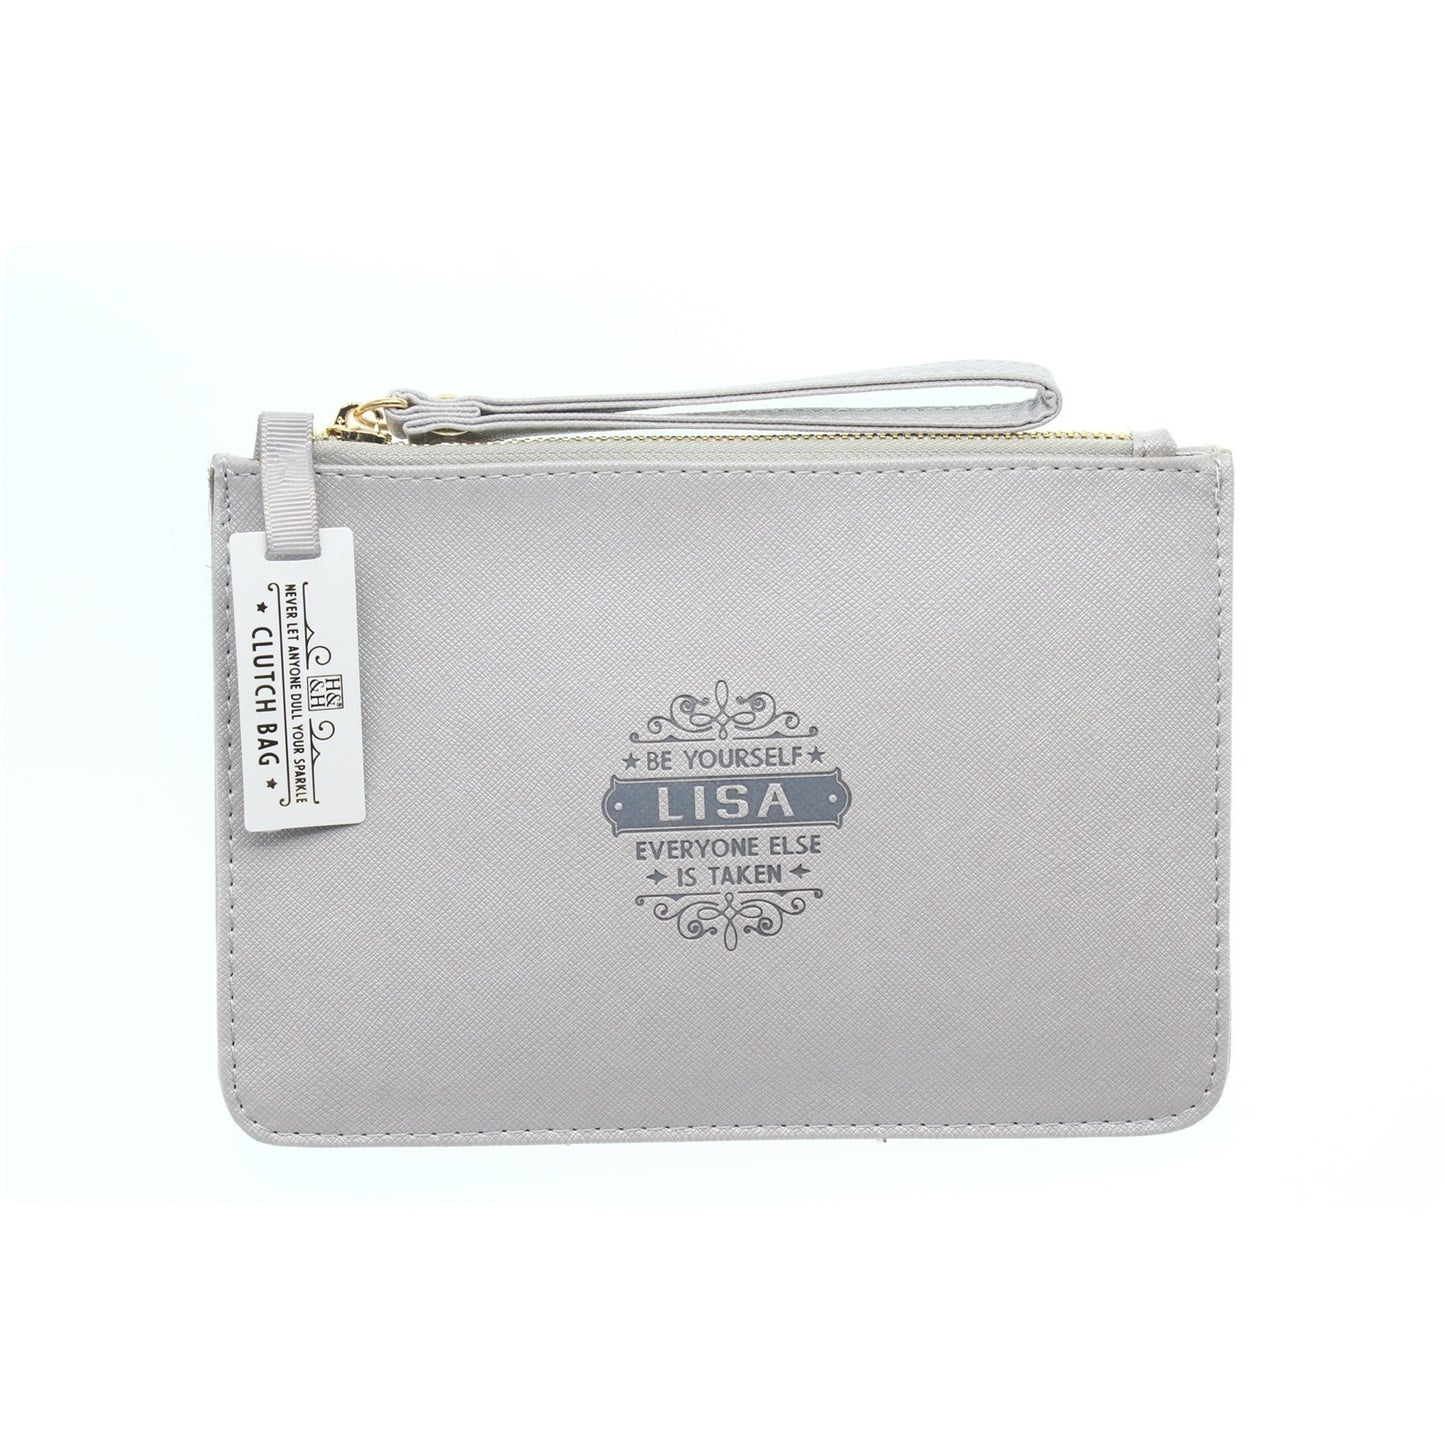 Clutch Bag With Handle & Embossed Text "Lisa"